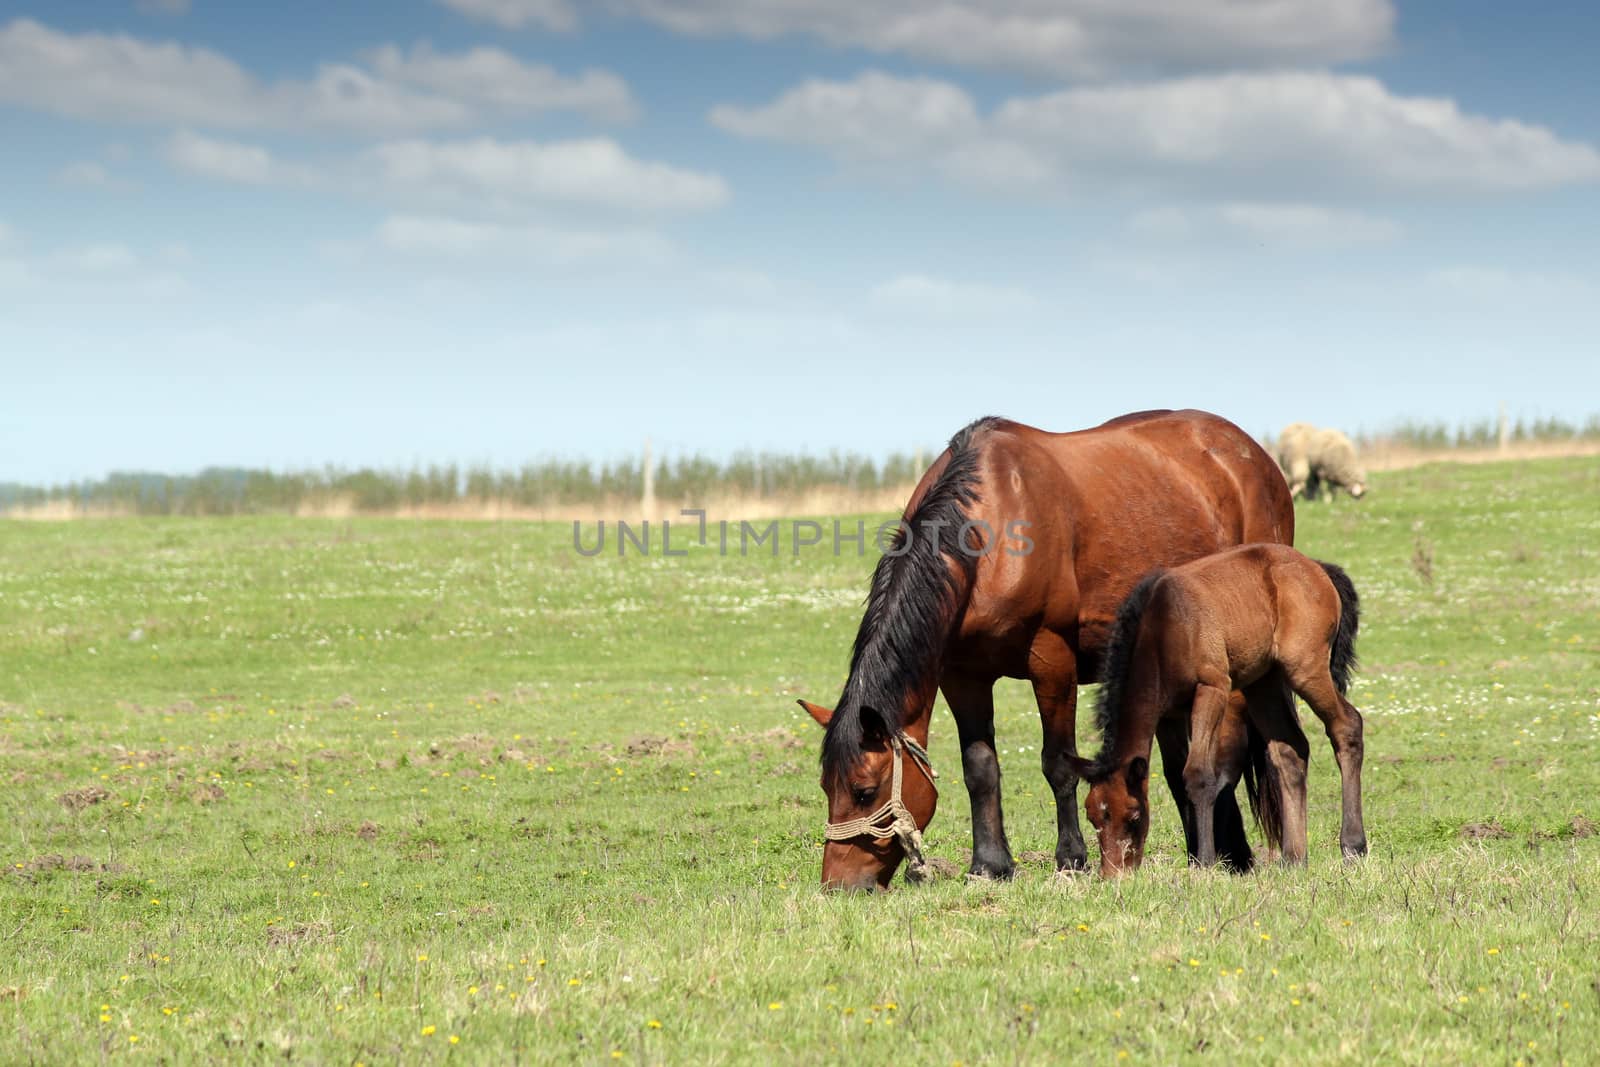 mare and foal on pasture ranch scene by goce